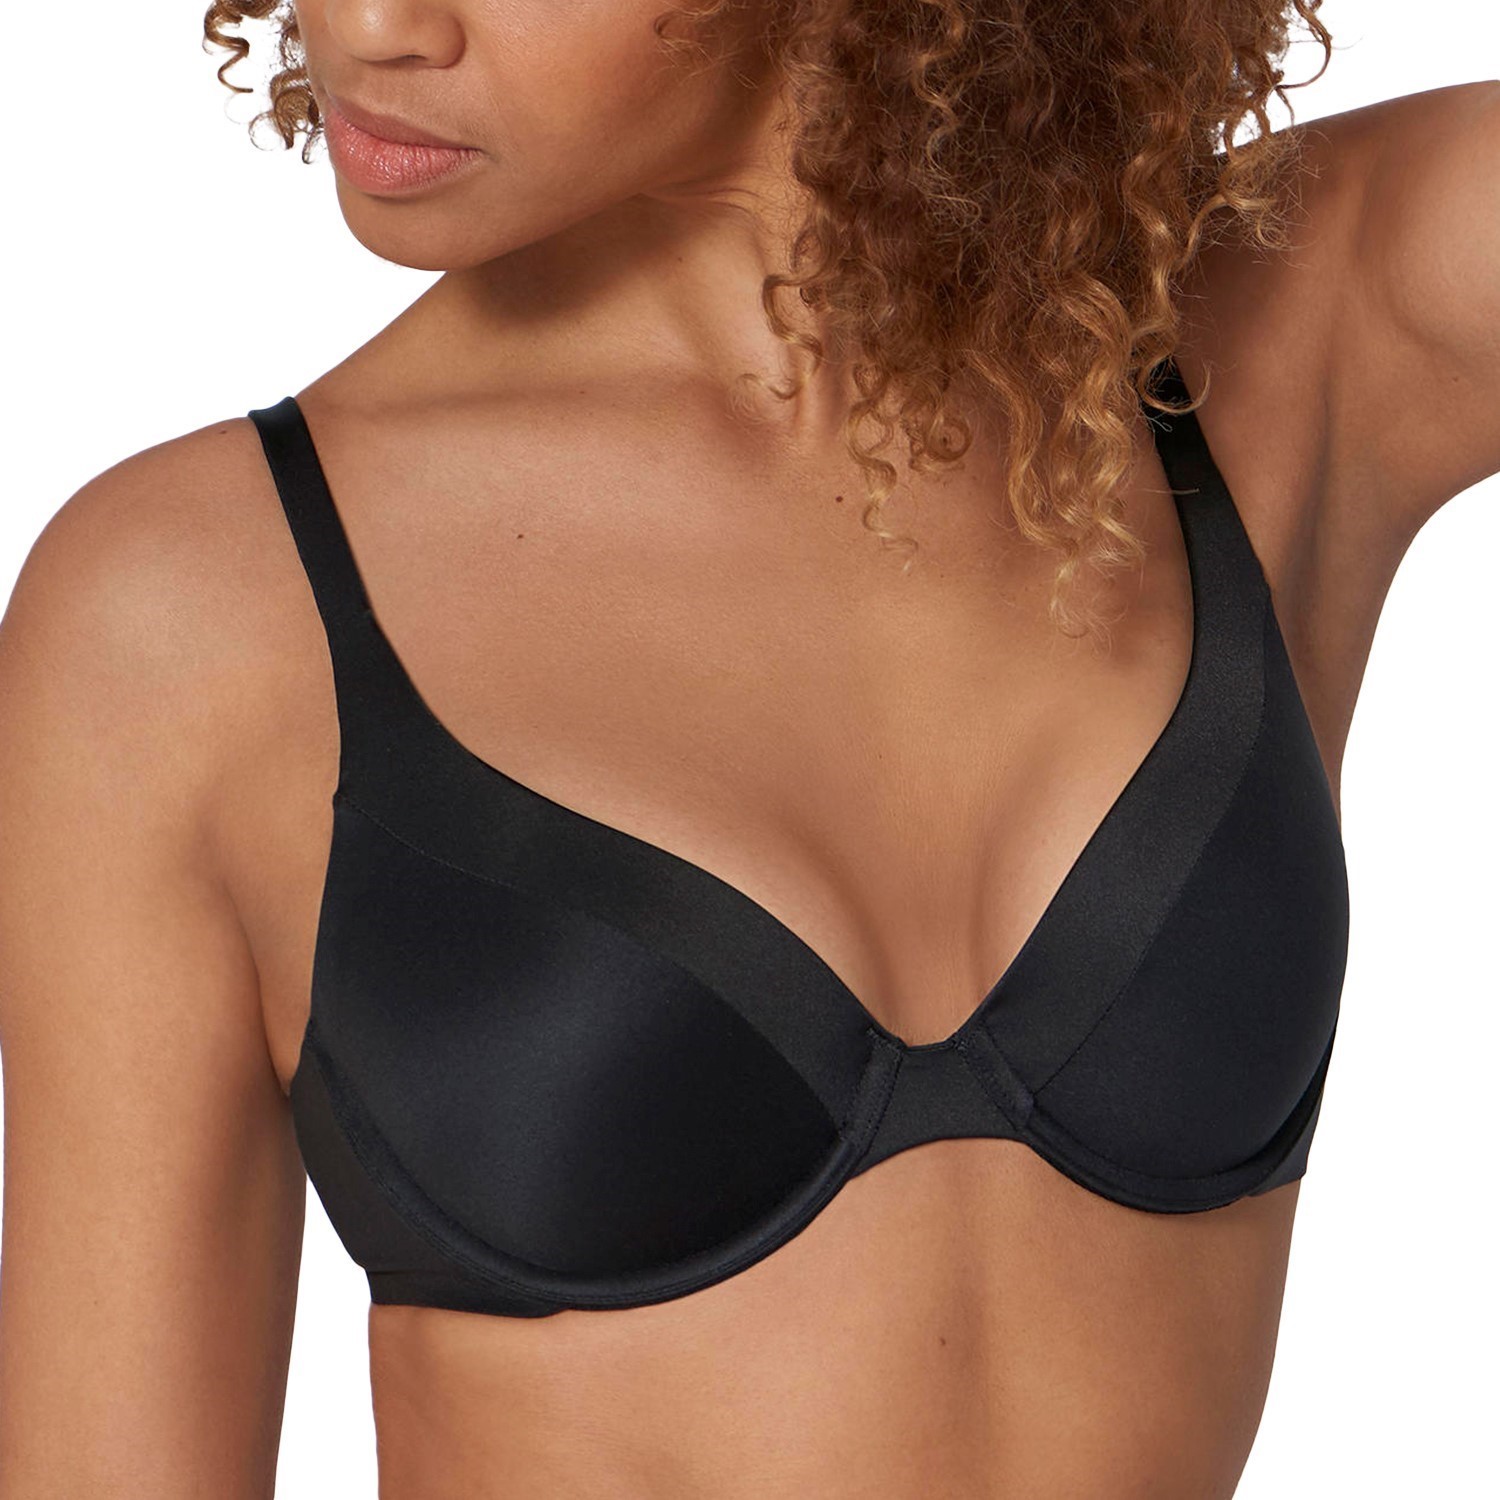 Conturelle Soft Touch Body Shaper - Uplift Intimate Apparel